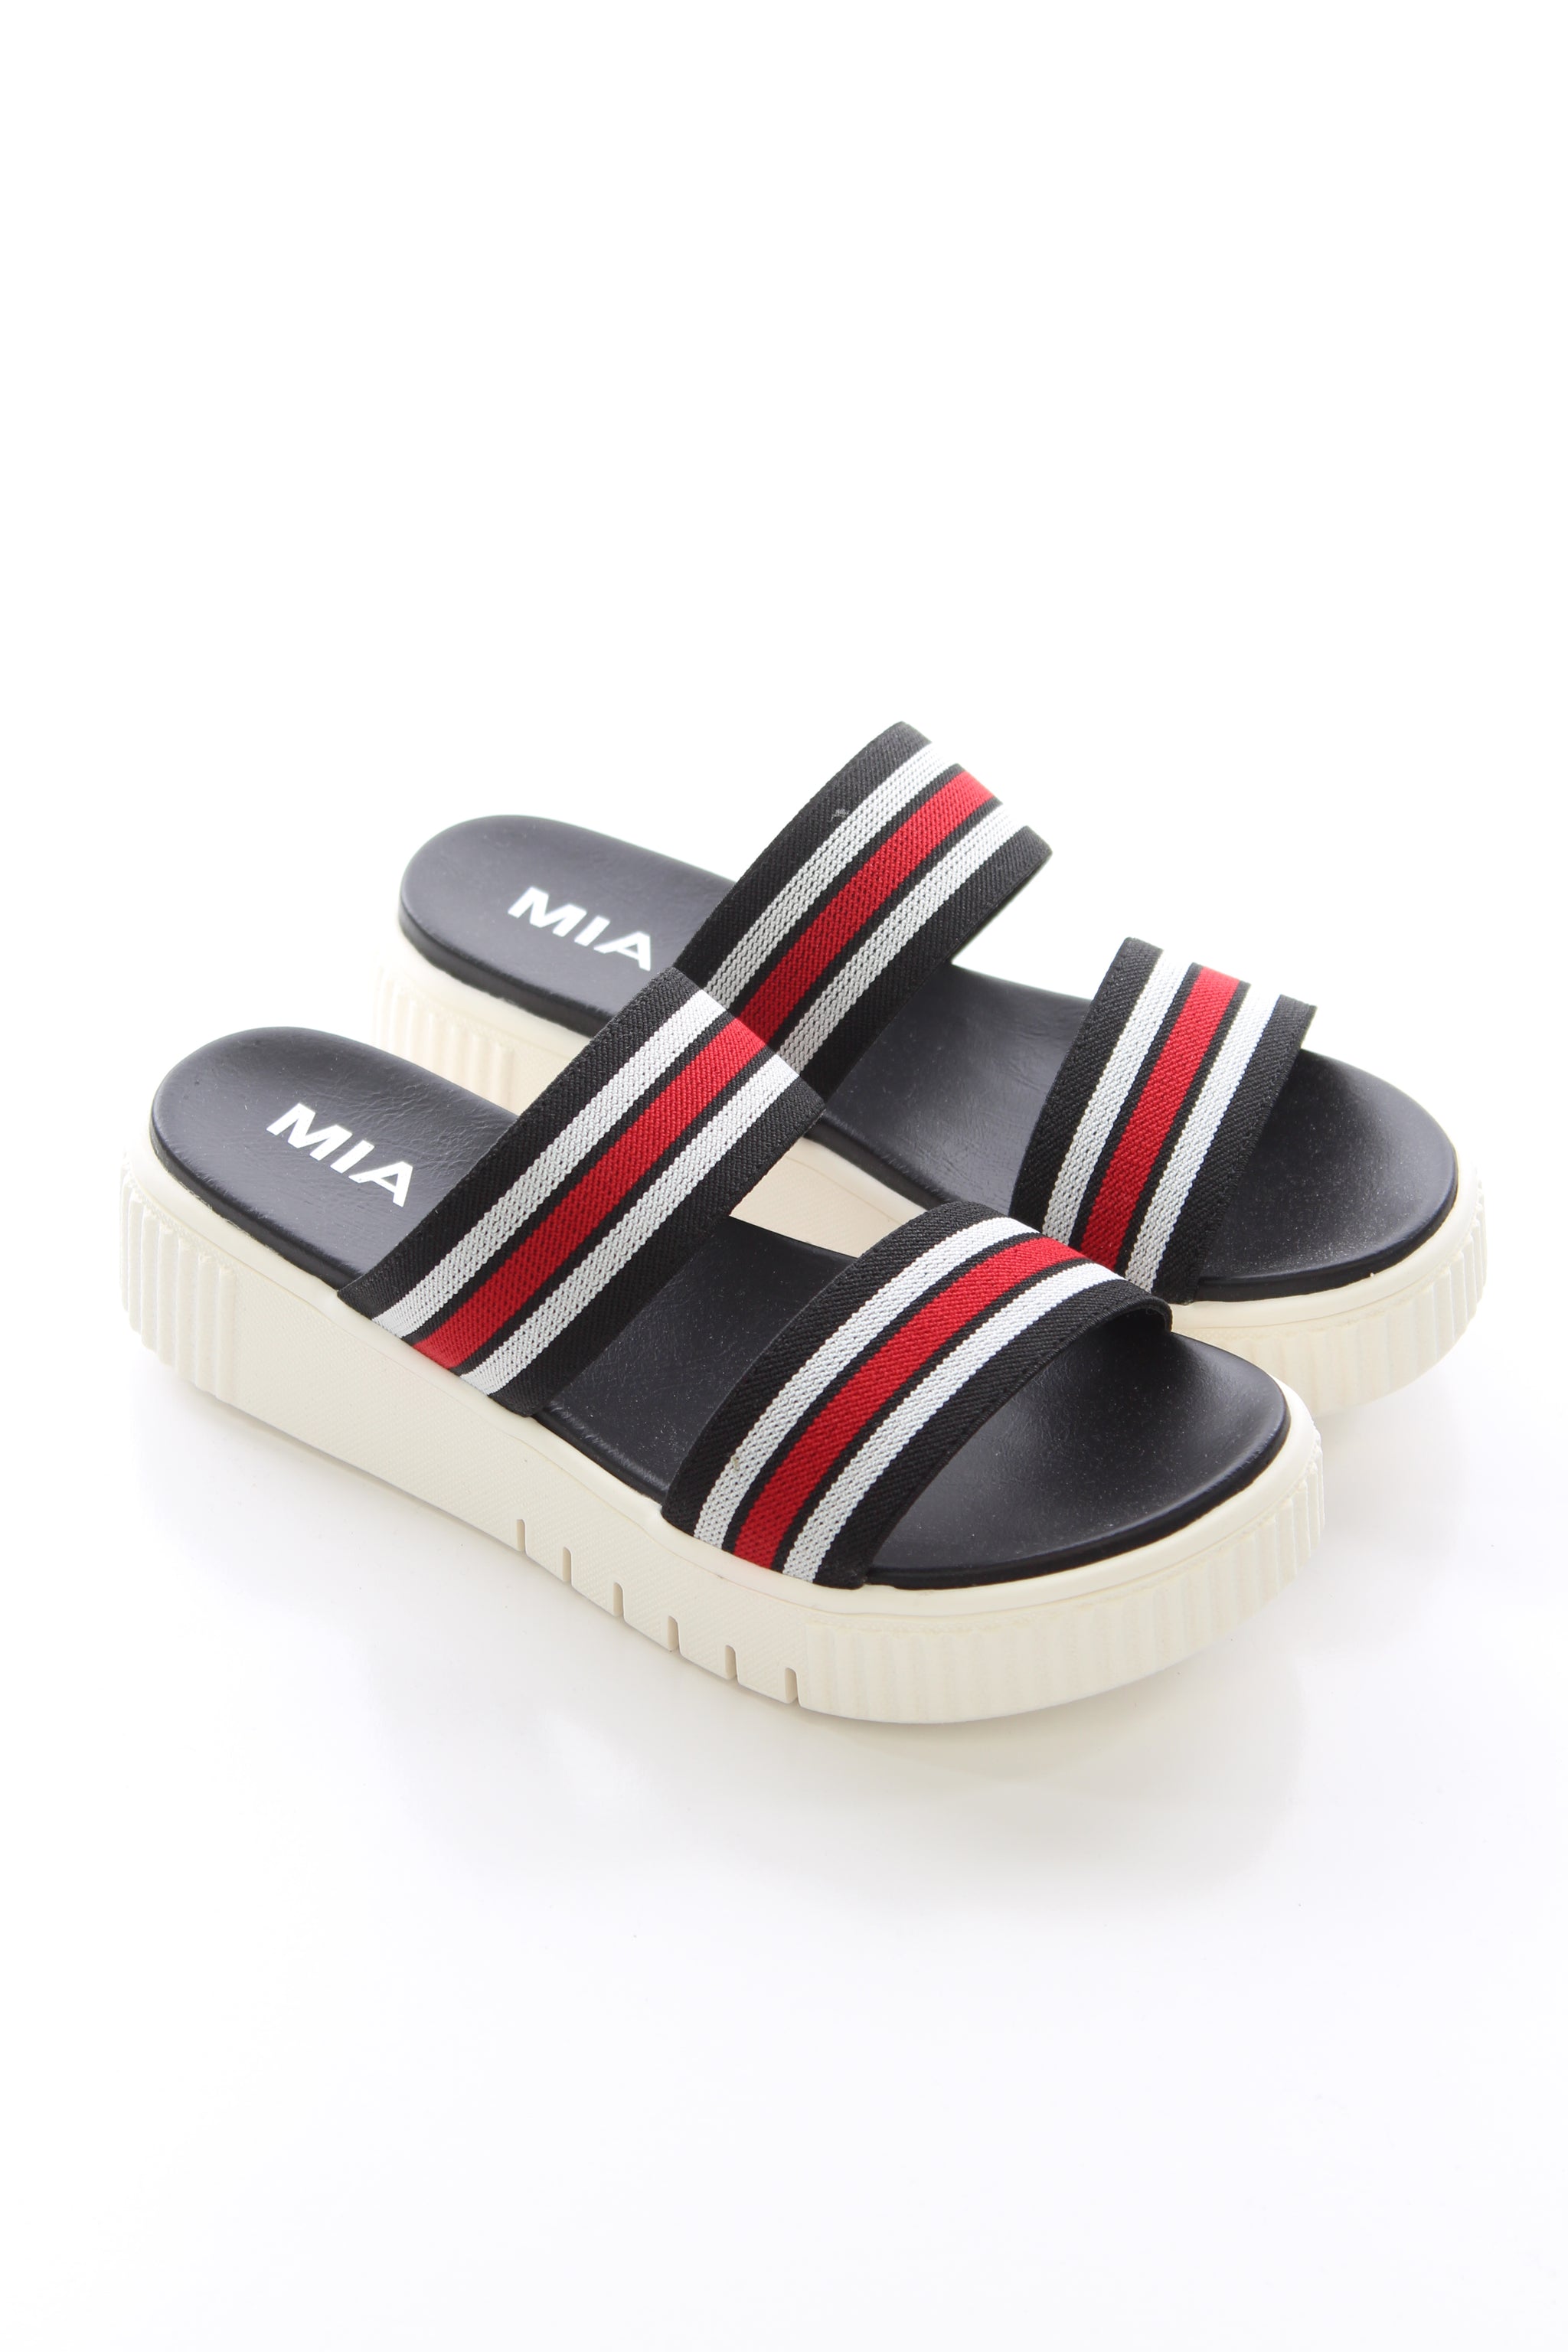 mia red sandals